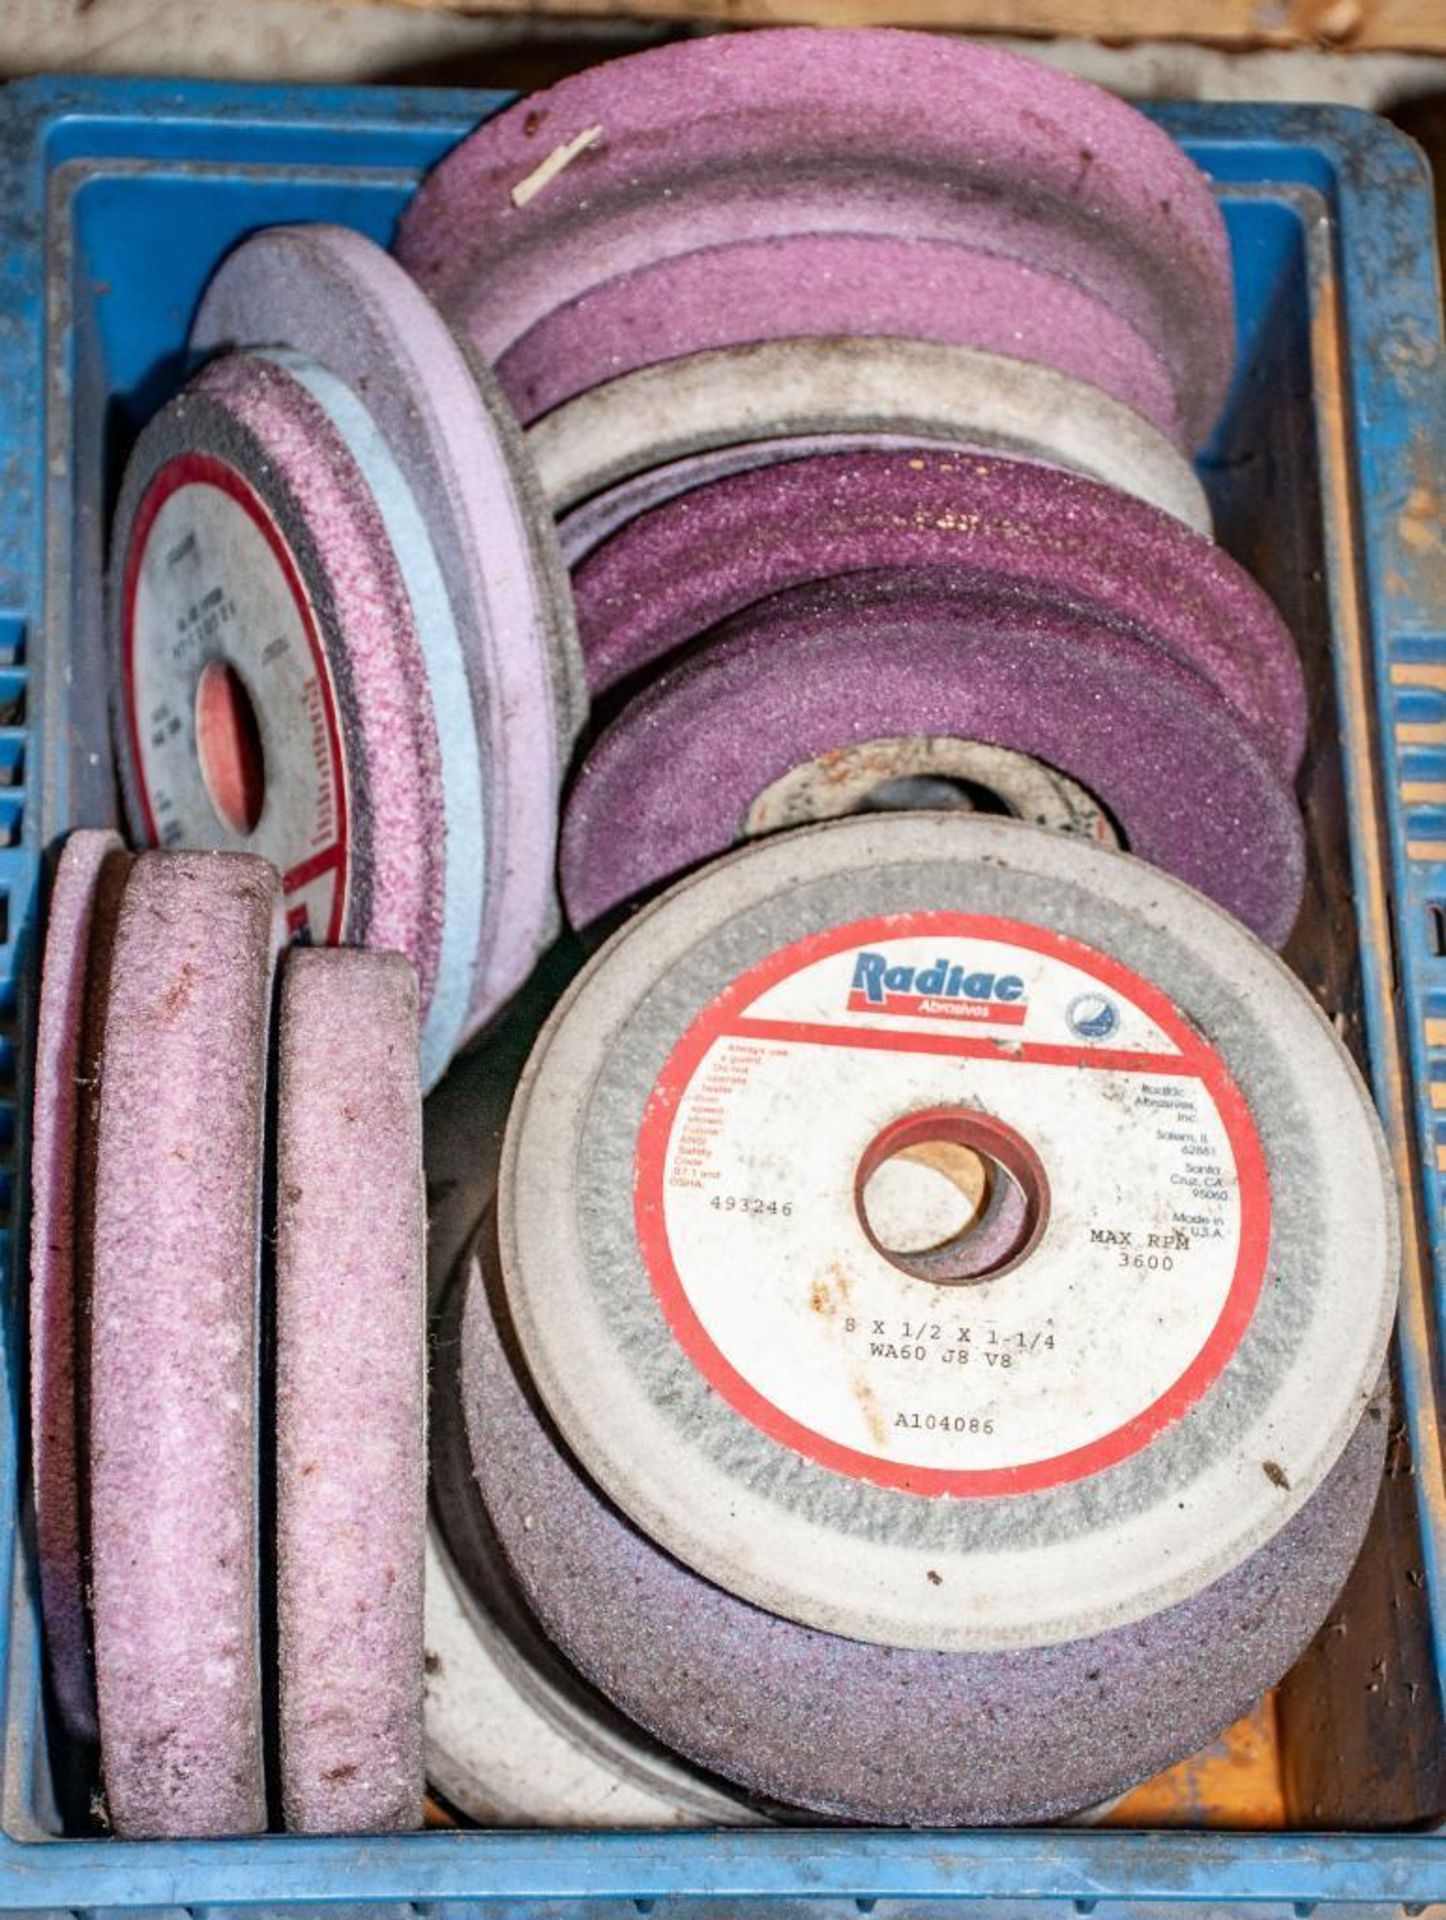 Lot c/o: Assorted (2) Small Totes Grinding Wheels, Most appear to Be 7-8" w/ 1 1/4" Arbor Hole, on p - Bild 2 aus 3